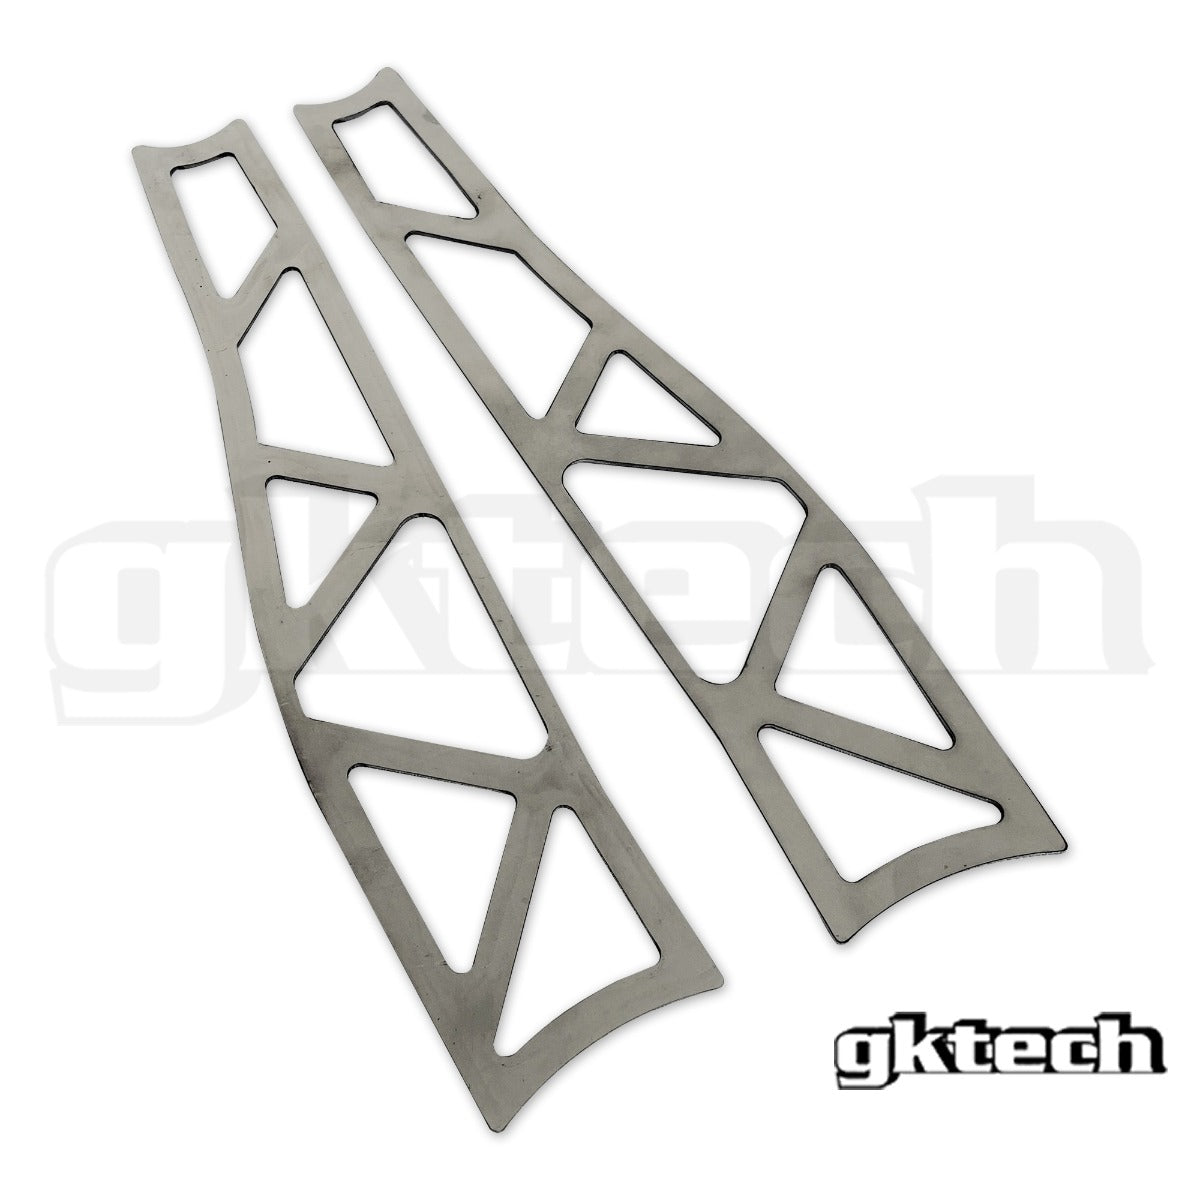 240sx/Skyline chassis (RWD) Front LCA weld in reinforcement plates